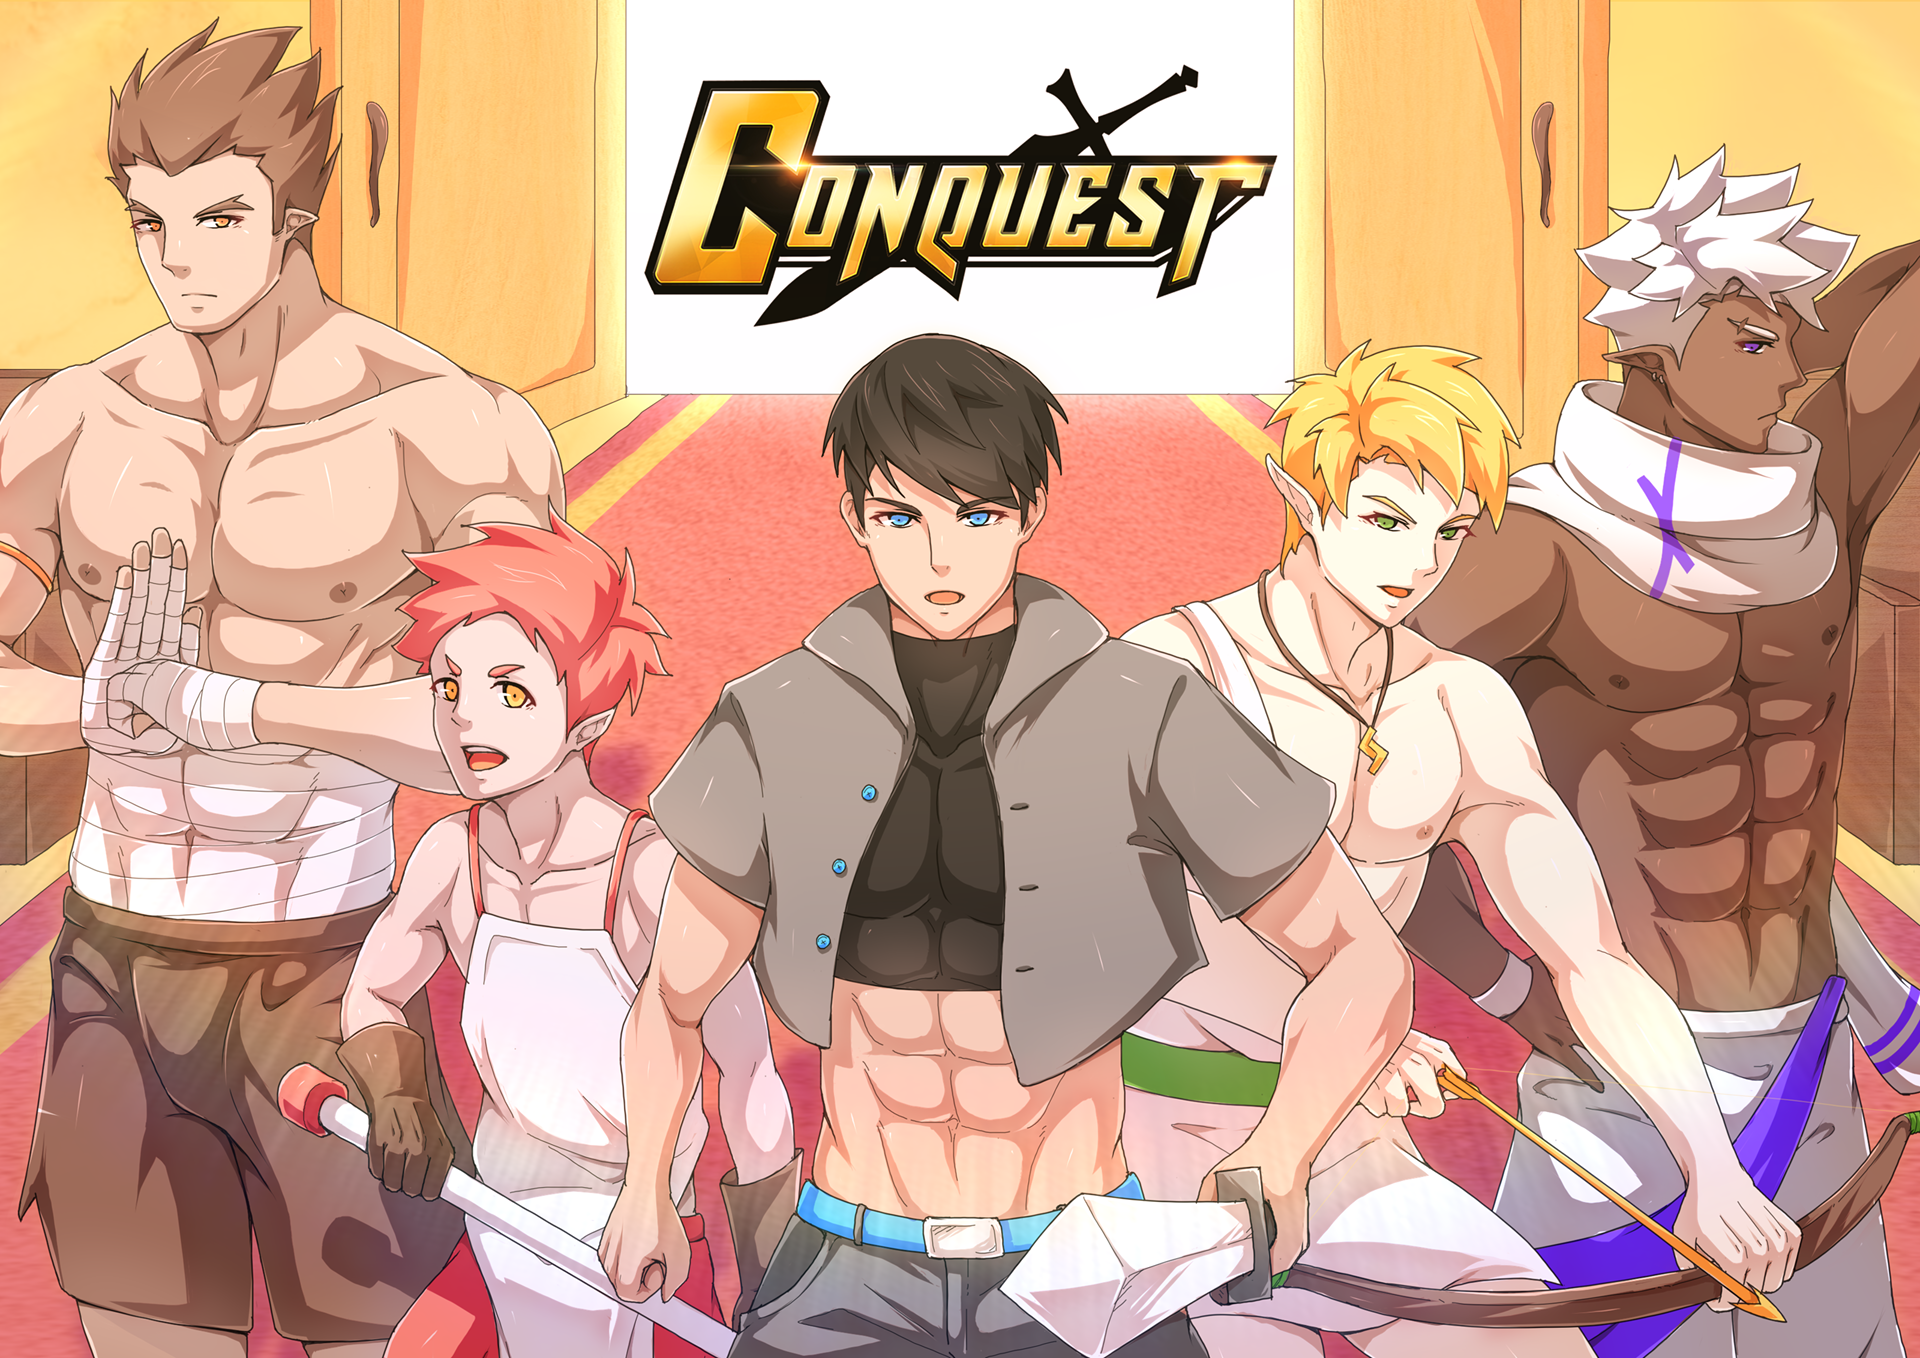 Conquest - BL/Yaoi Fighting Visual Novel